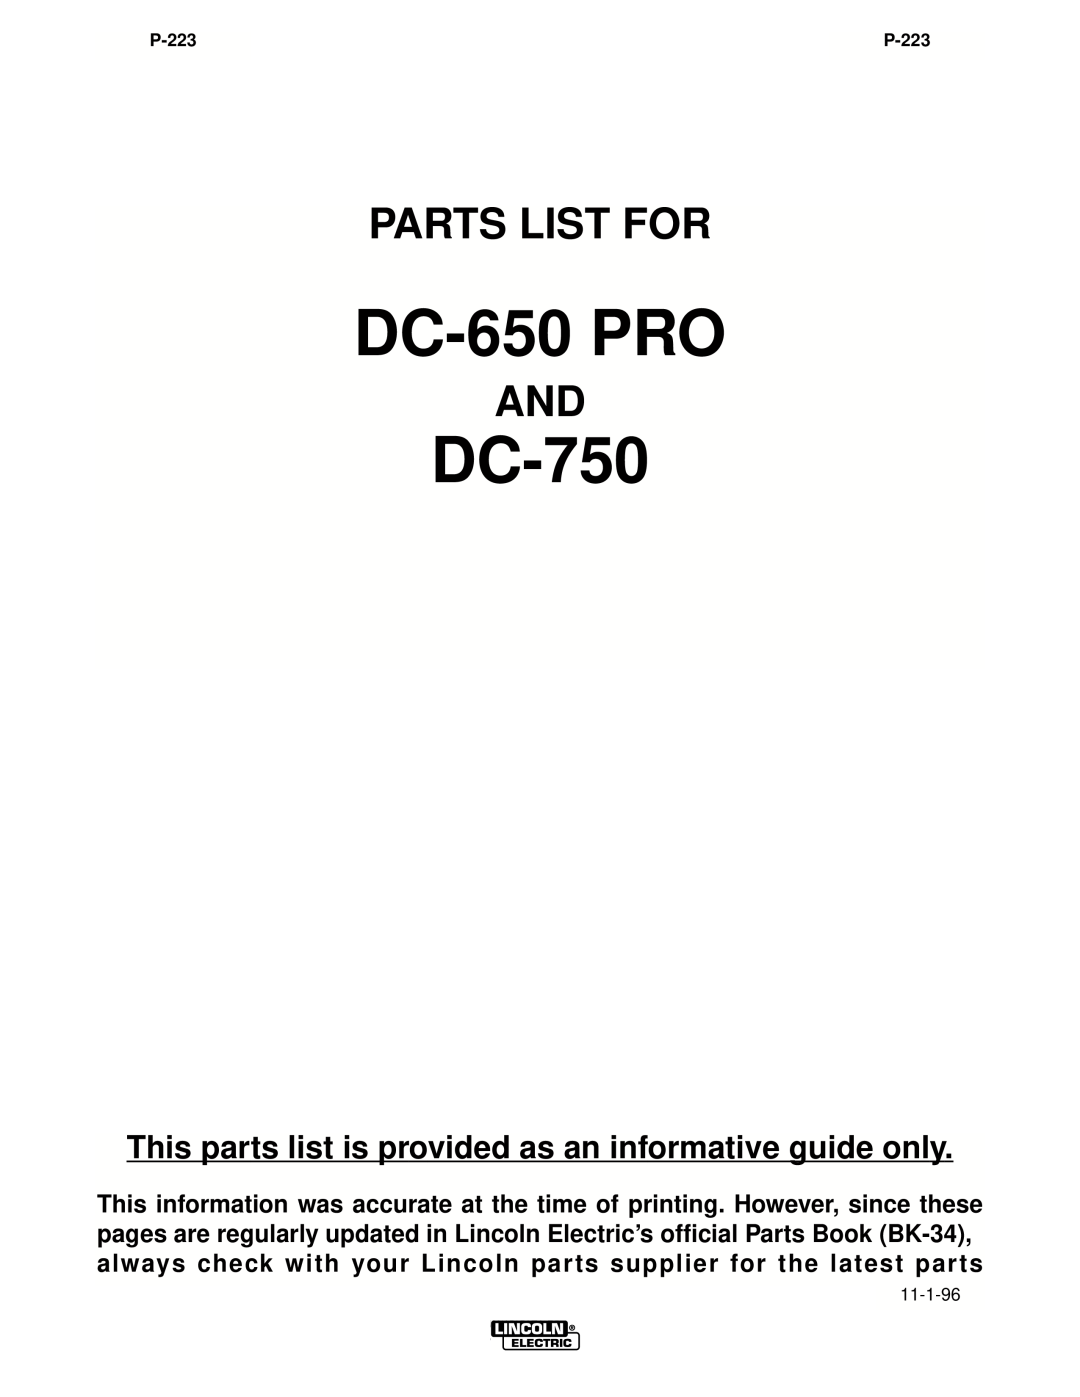 Lincoln Electric IM463-A manual DC-650PRO, DC-750, Parts List For 